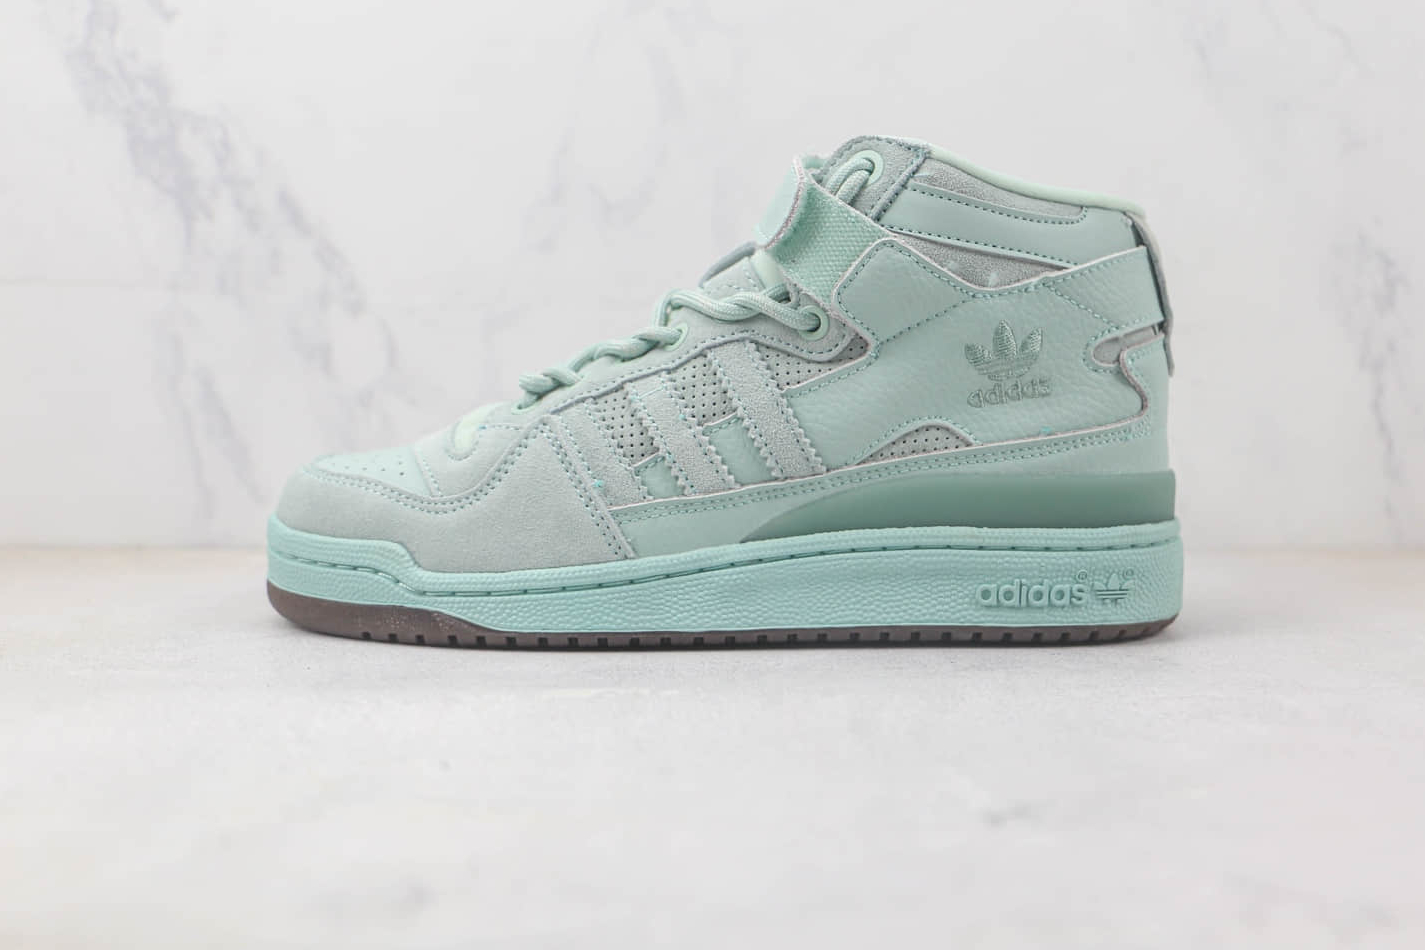 Adidas Ivy Park x Forum Mid 'Green Tint' FZ4387 - Shop the Iconic Collaboration Now